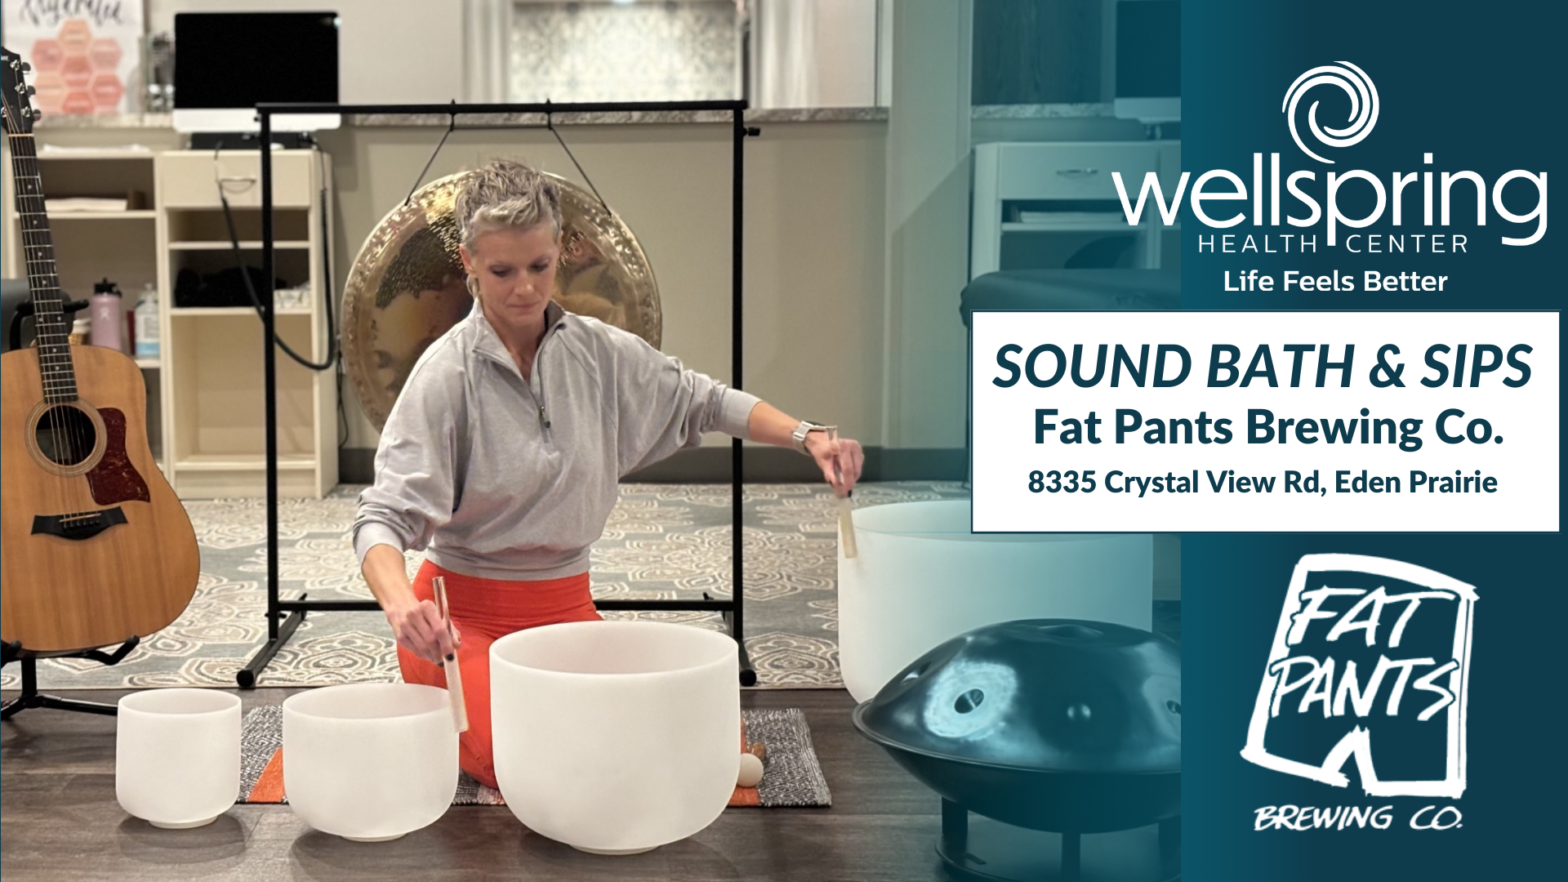 Sound Bath & Sips at Fat Pants Brewing Co.